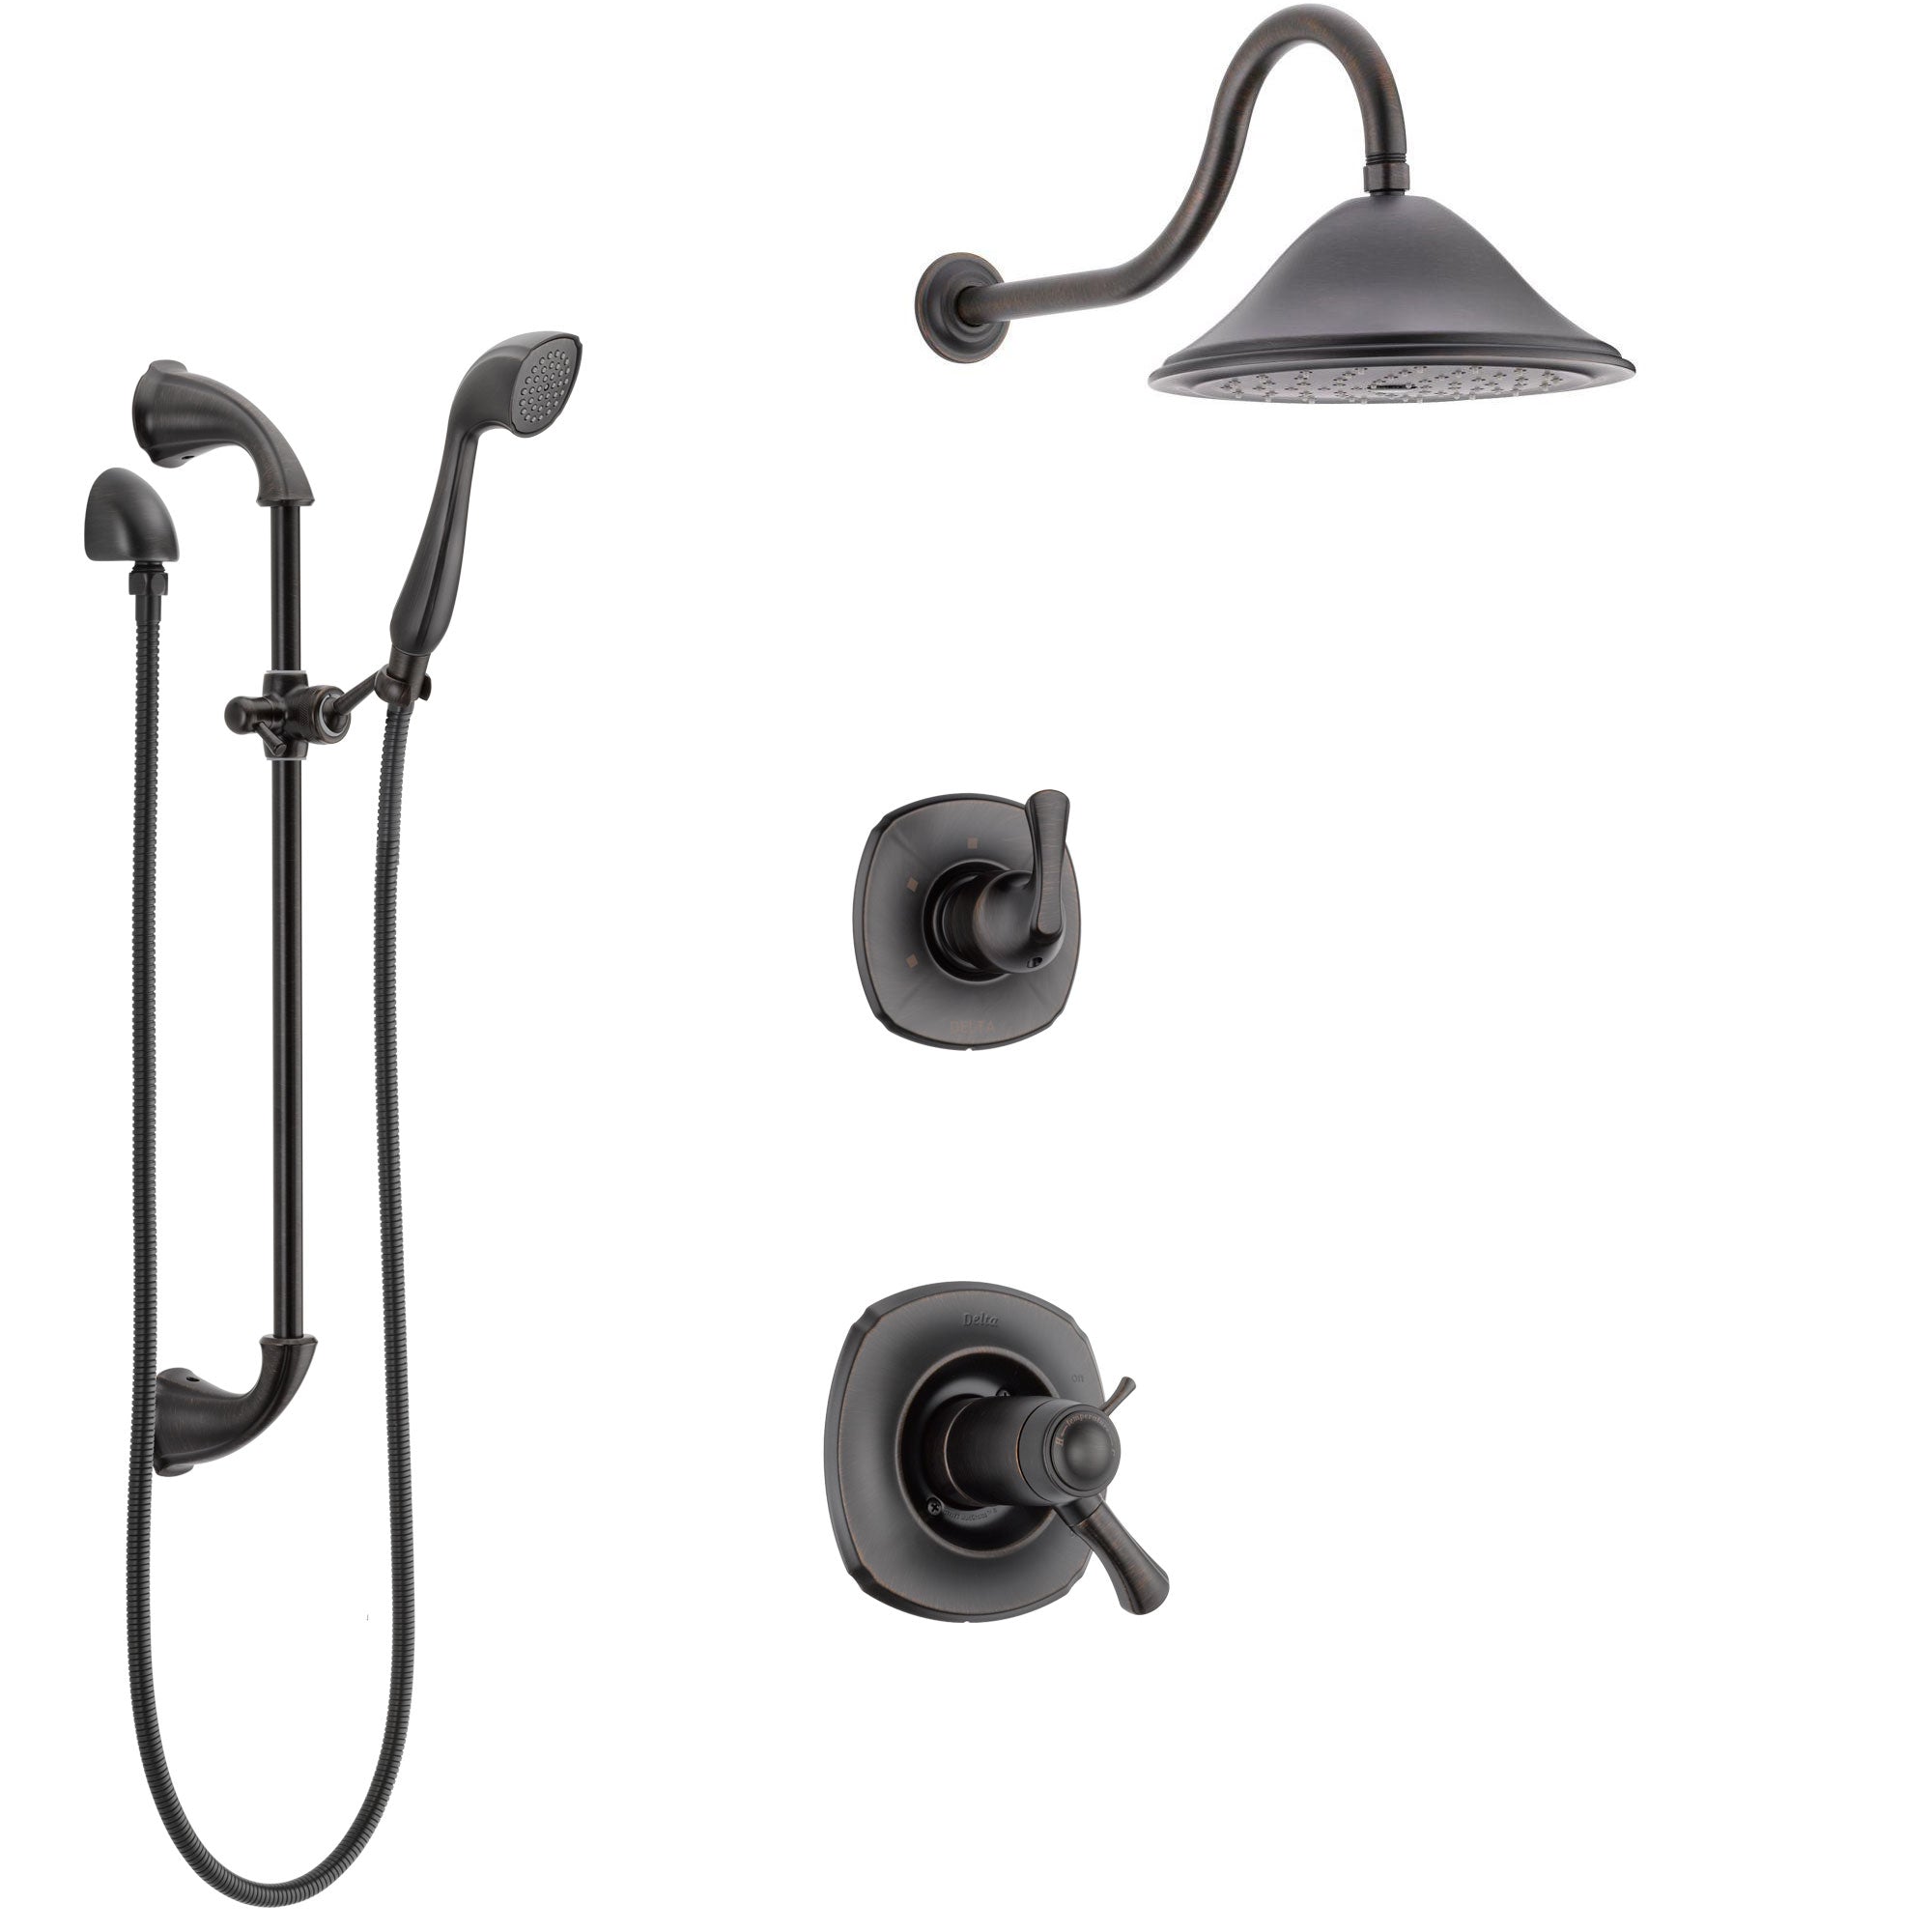 Delta Addison Venetian Bronze Shower System with Dual Thermostatic Control Handle, Diverter, Showerhead, and Hand Shower with Slidebar SS17T921RB1